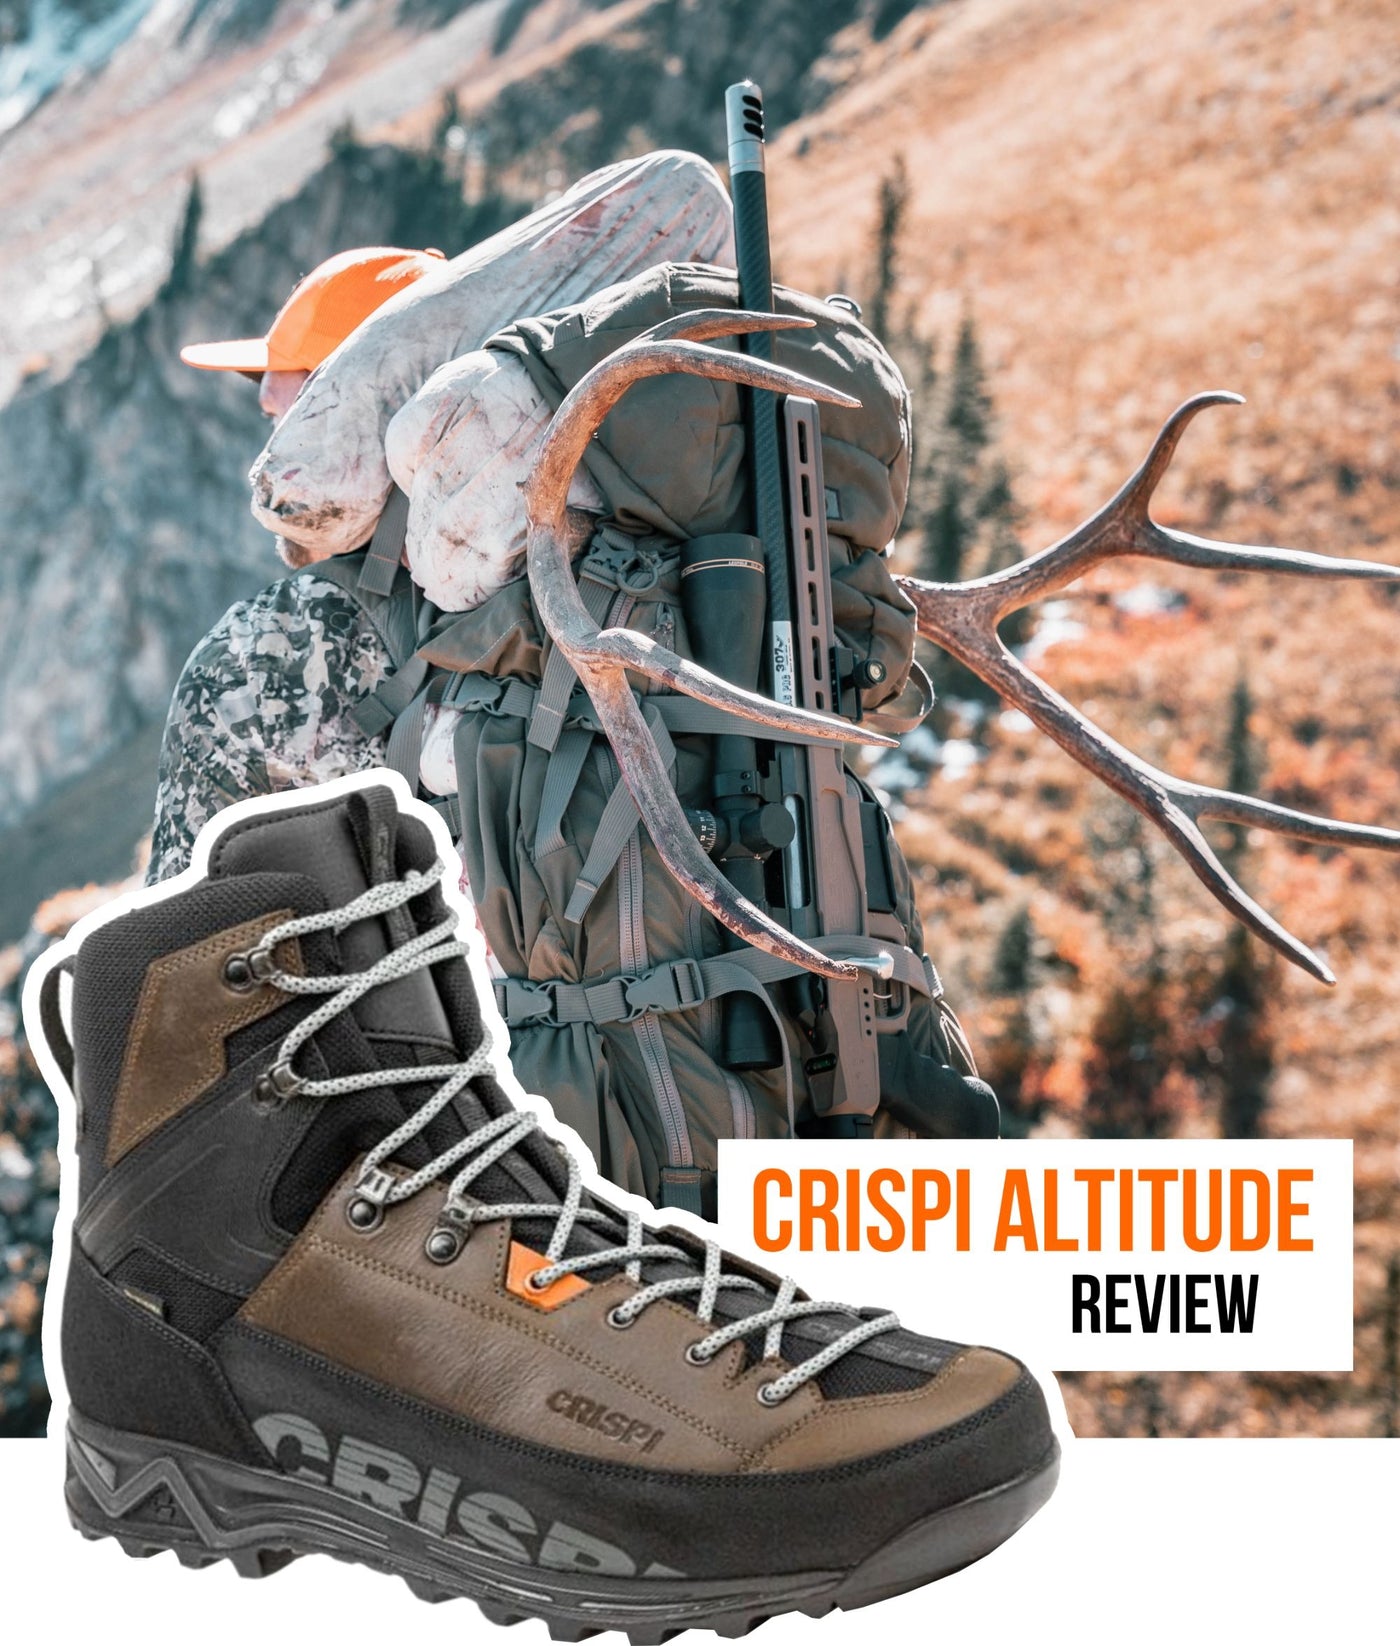 Crispi Altitude GTX Hunting Boot Review - My Thoughts after 1